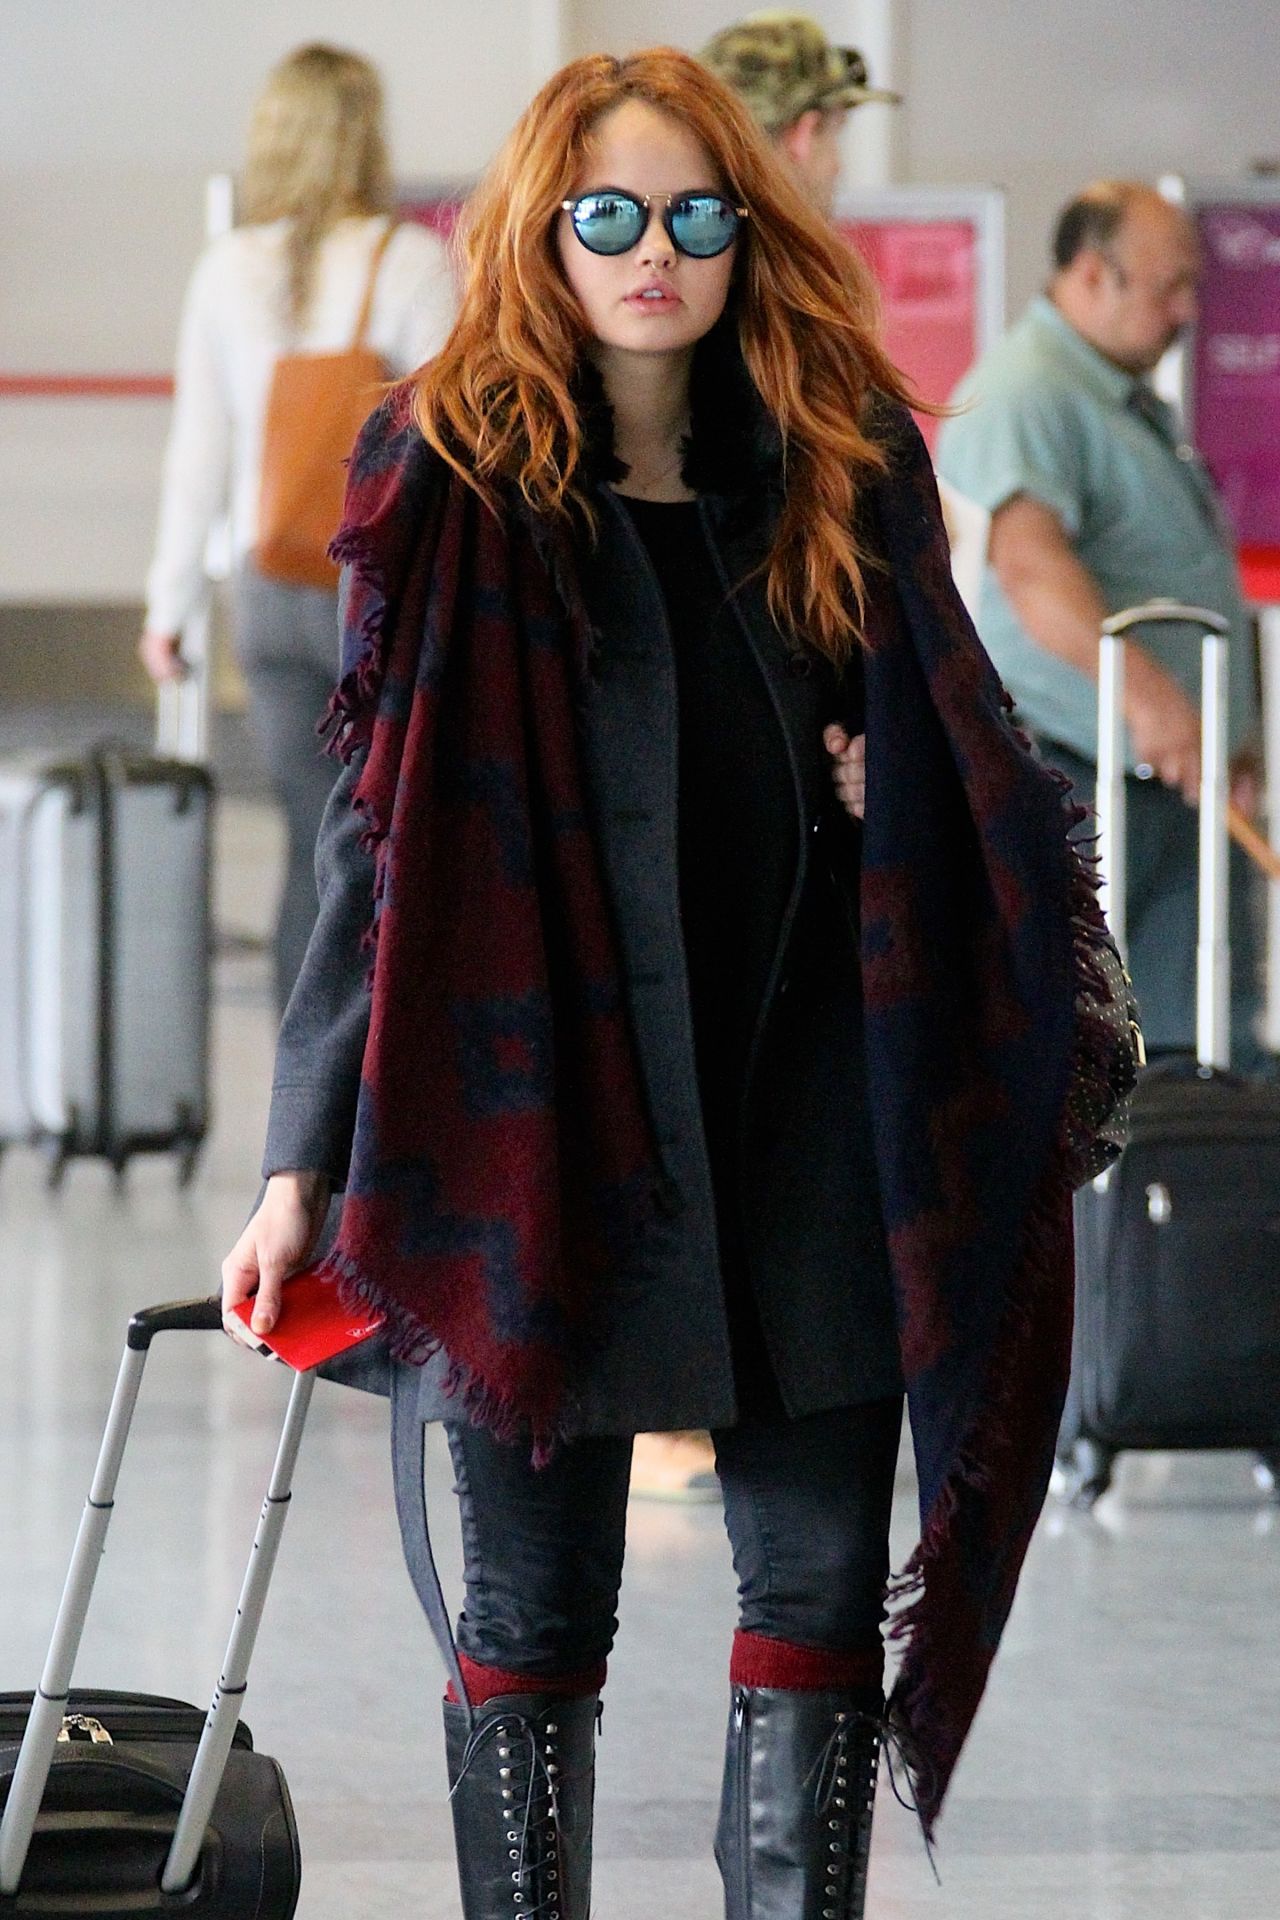 Debbie Ryan Style - at LAX Airport, March 2015